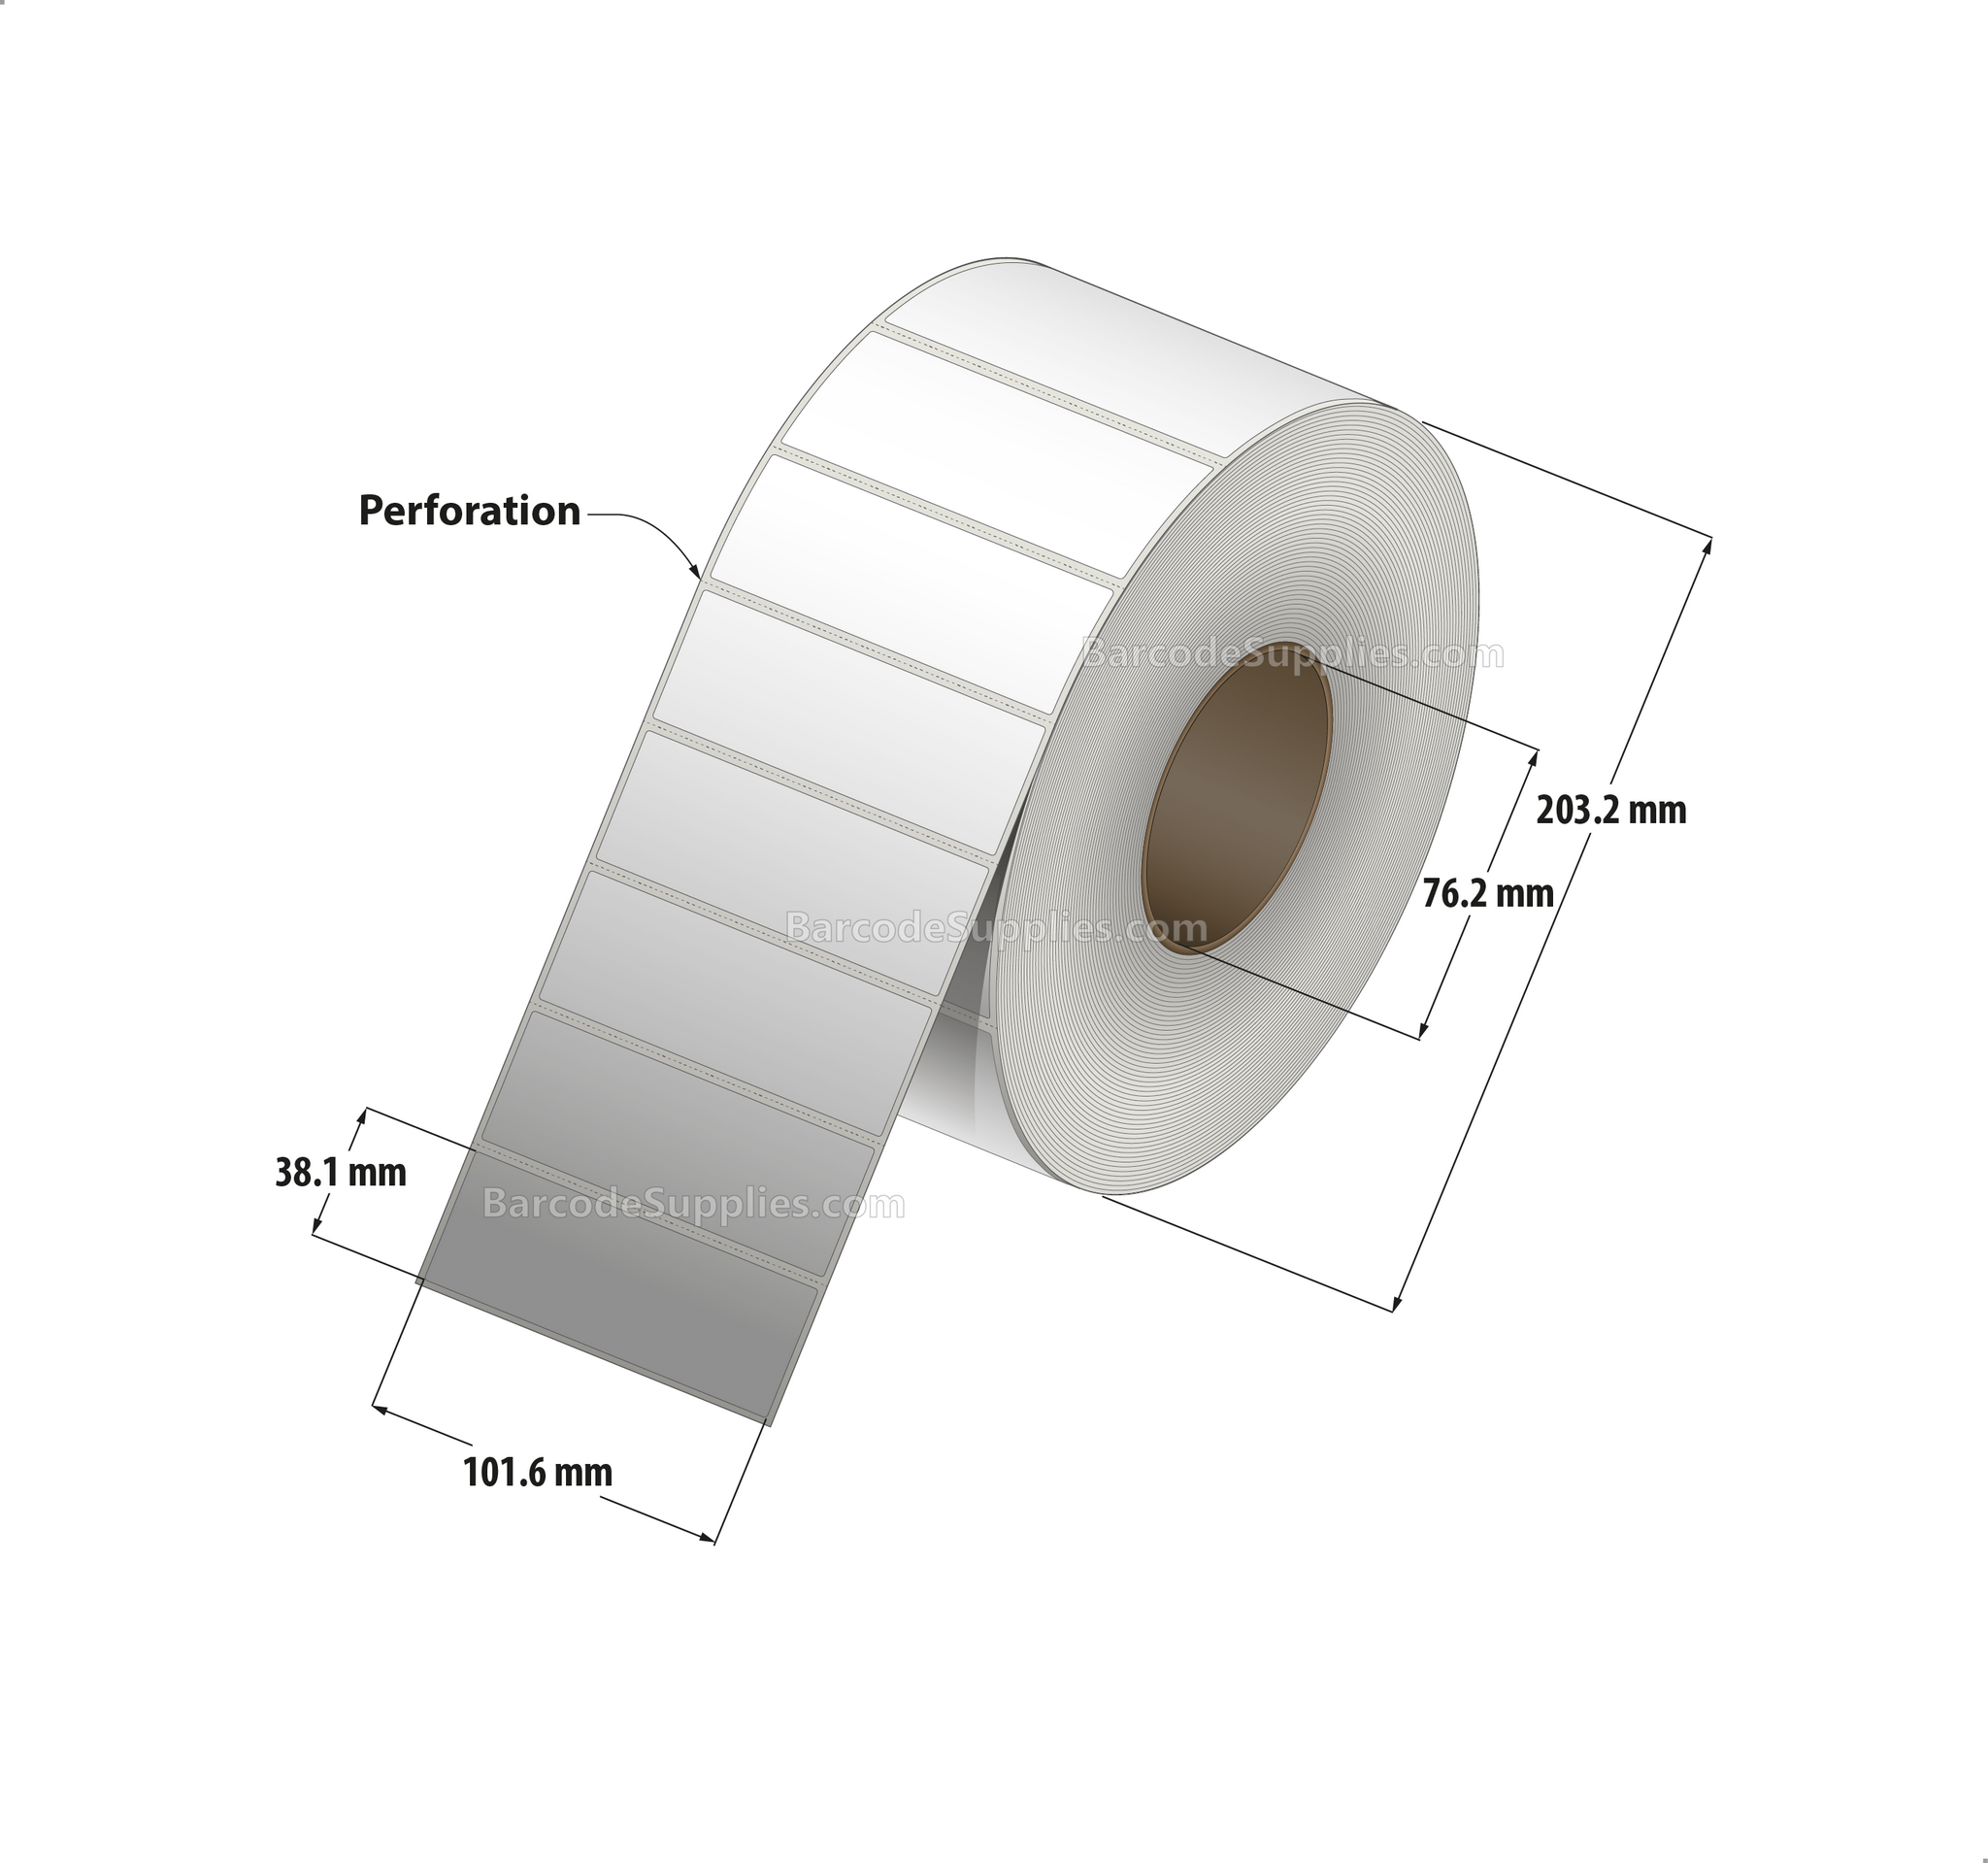 4 x 1.5 Direct Thermal White Labels With Rubber Adhesive - Perforated - 3850 Labels Per Roll - Carton Of 4 Rolls - 15400 Labels Total - MPN: DT400150-3P